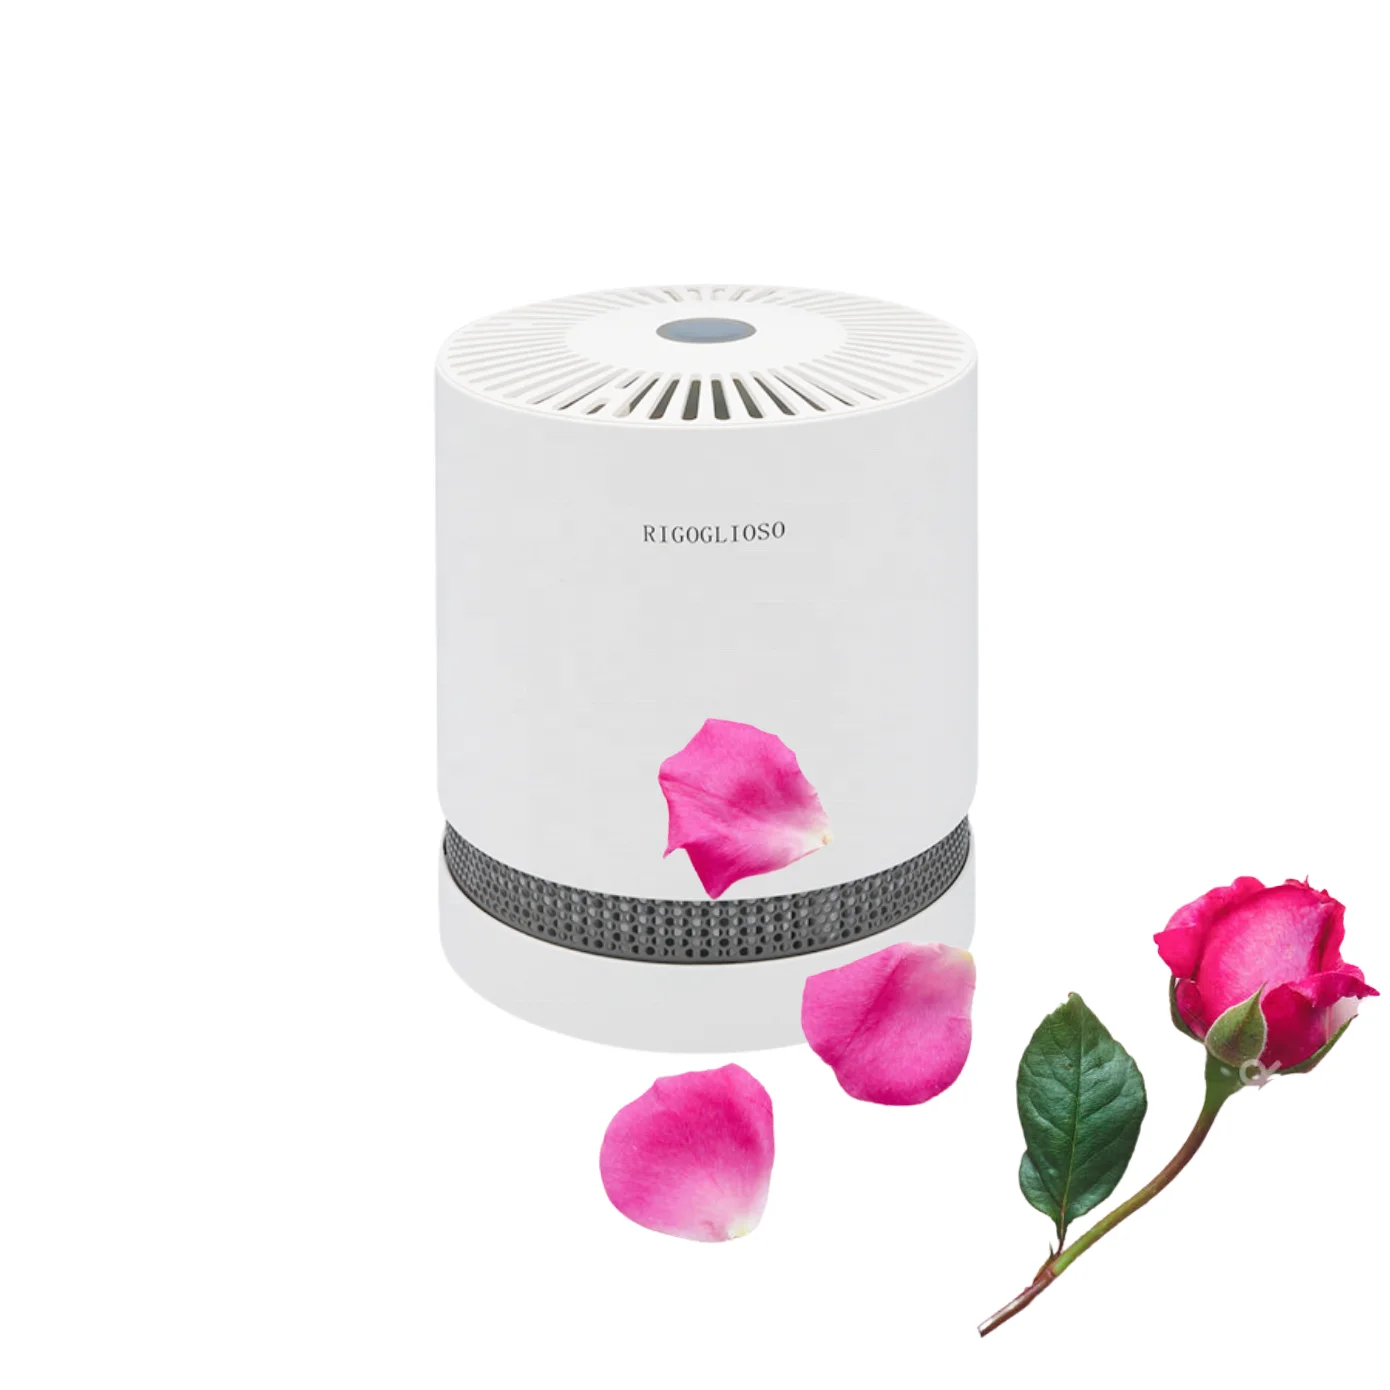 

Bedroom Air Purifier Remove Smoke Office Air Cleaner Portable Air Freshener